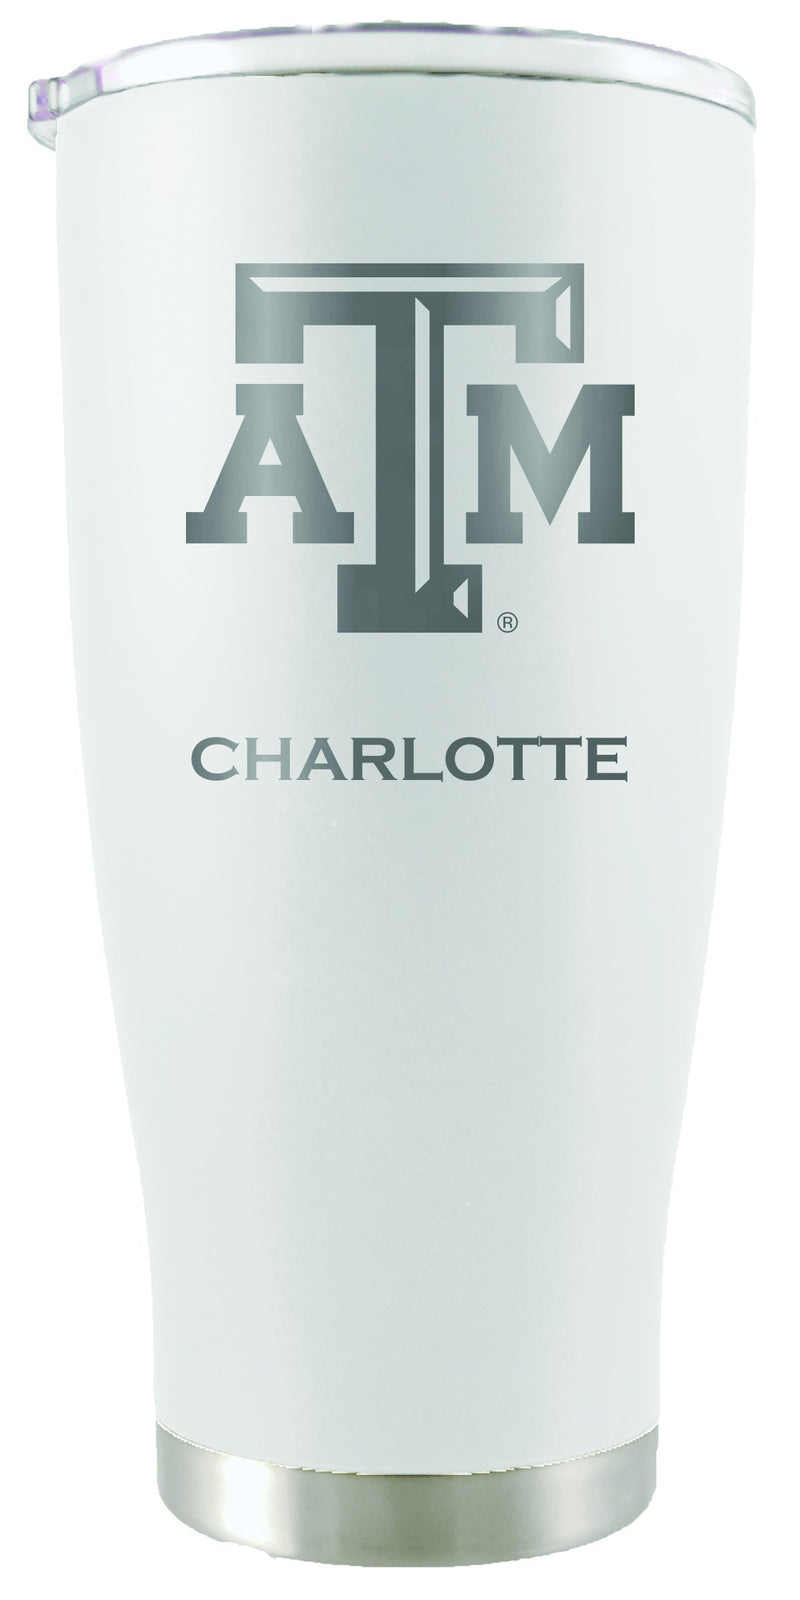 20oz White Personalized Stainless Steel Tumbler | Texas A&M
COL, CurrentProduct, Drinkware_category_All, Personalized_Personalized, TAM, Texas A&M Aggies
The Memory Company